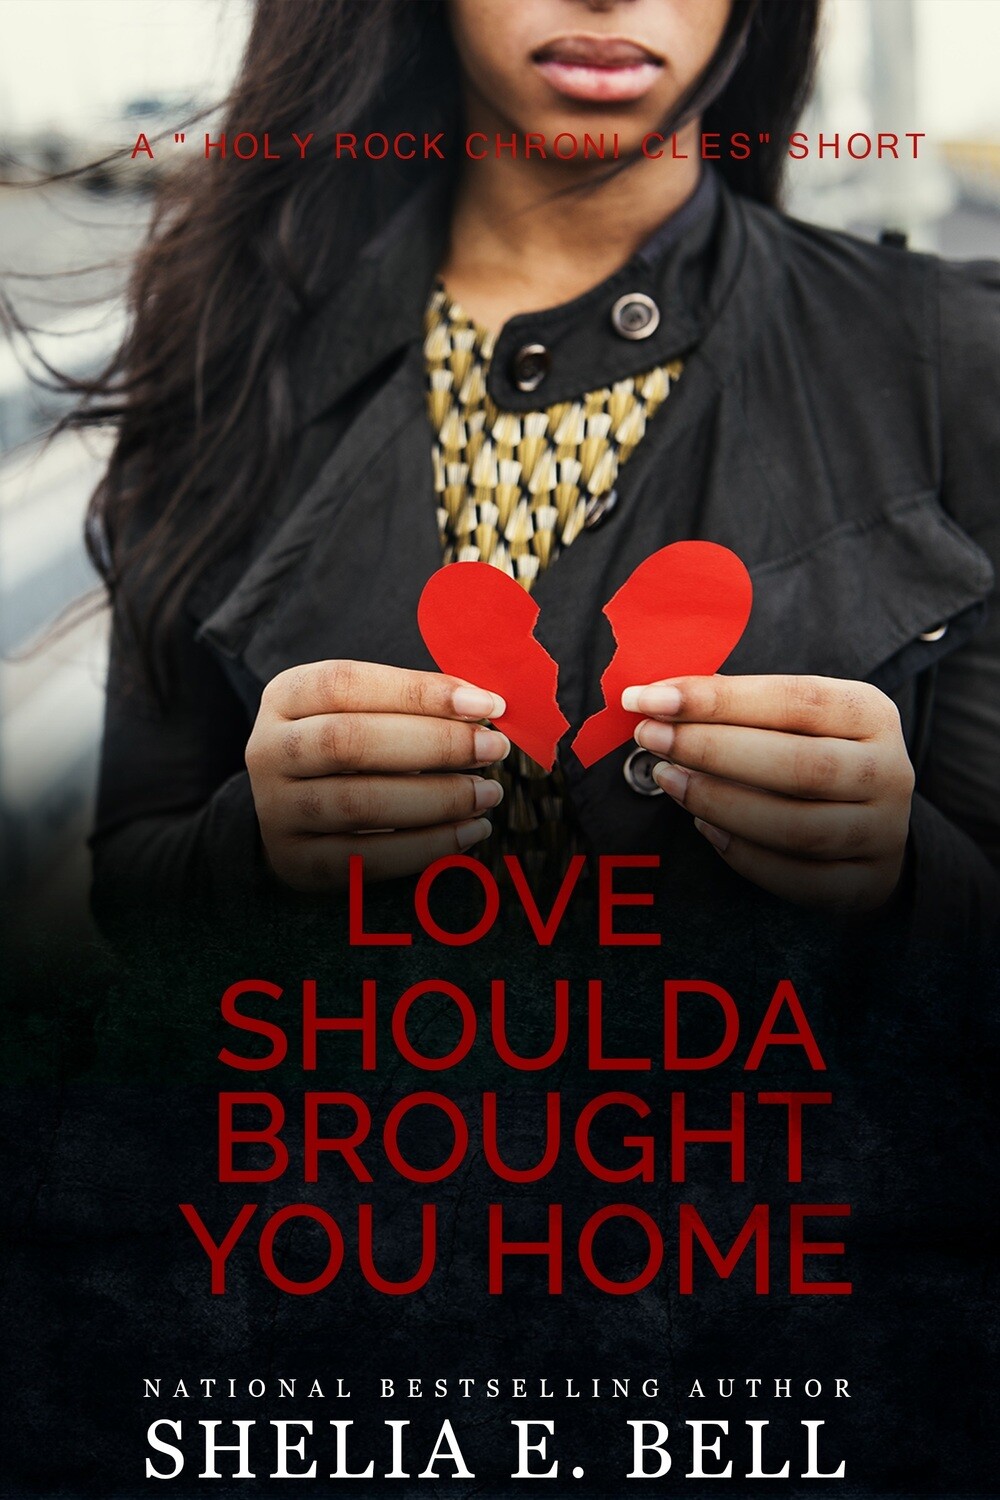 LOVE SHOULDA BROUGHT YOU HOME (HOLY ROCK CHRONICLES)